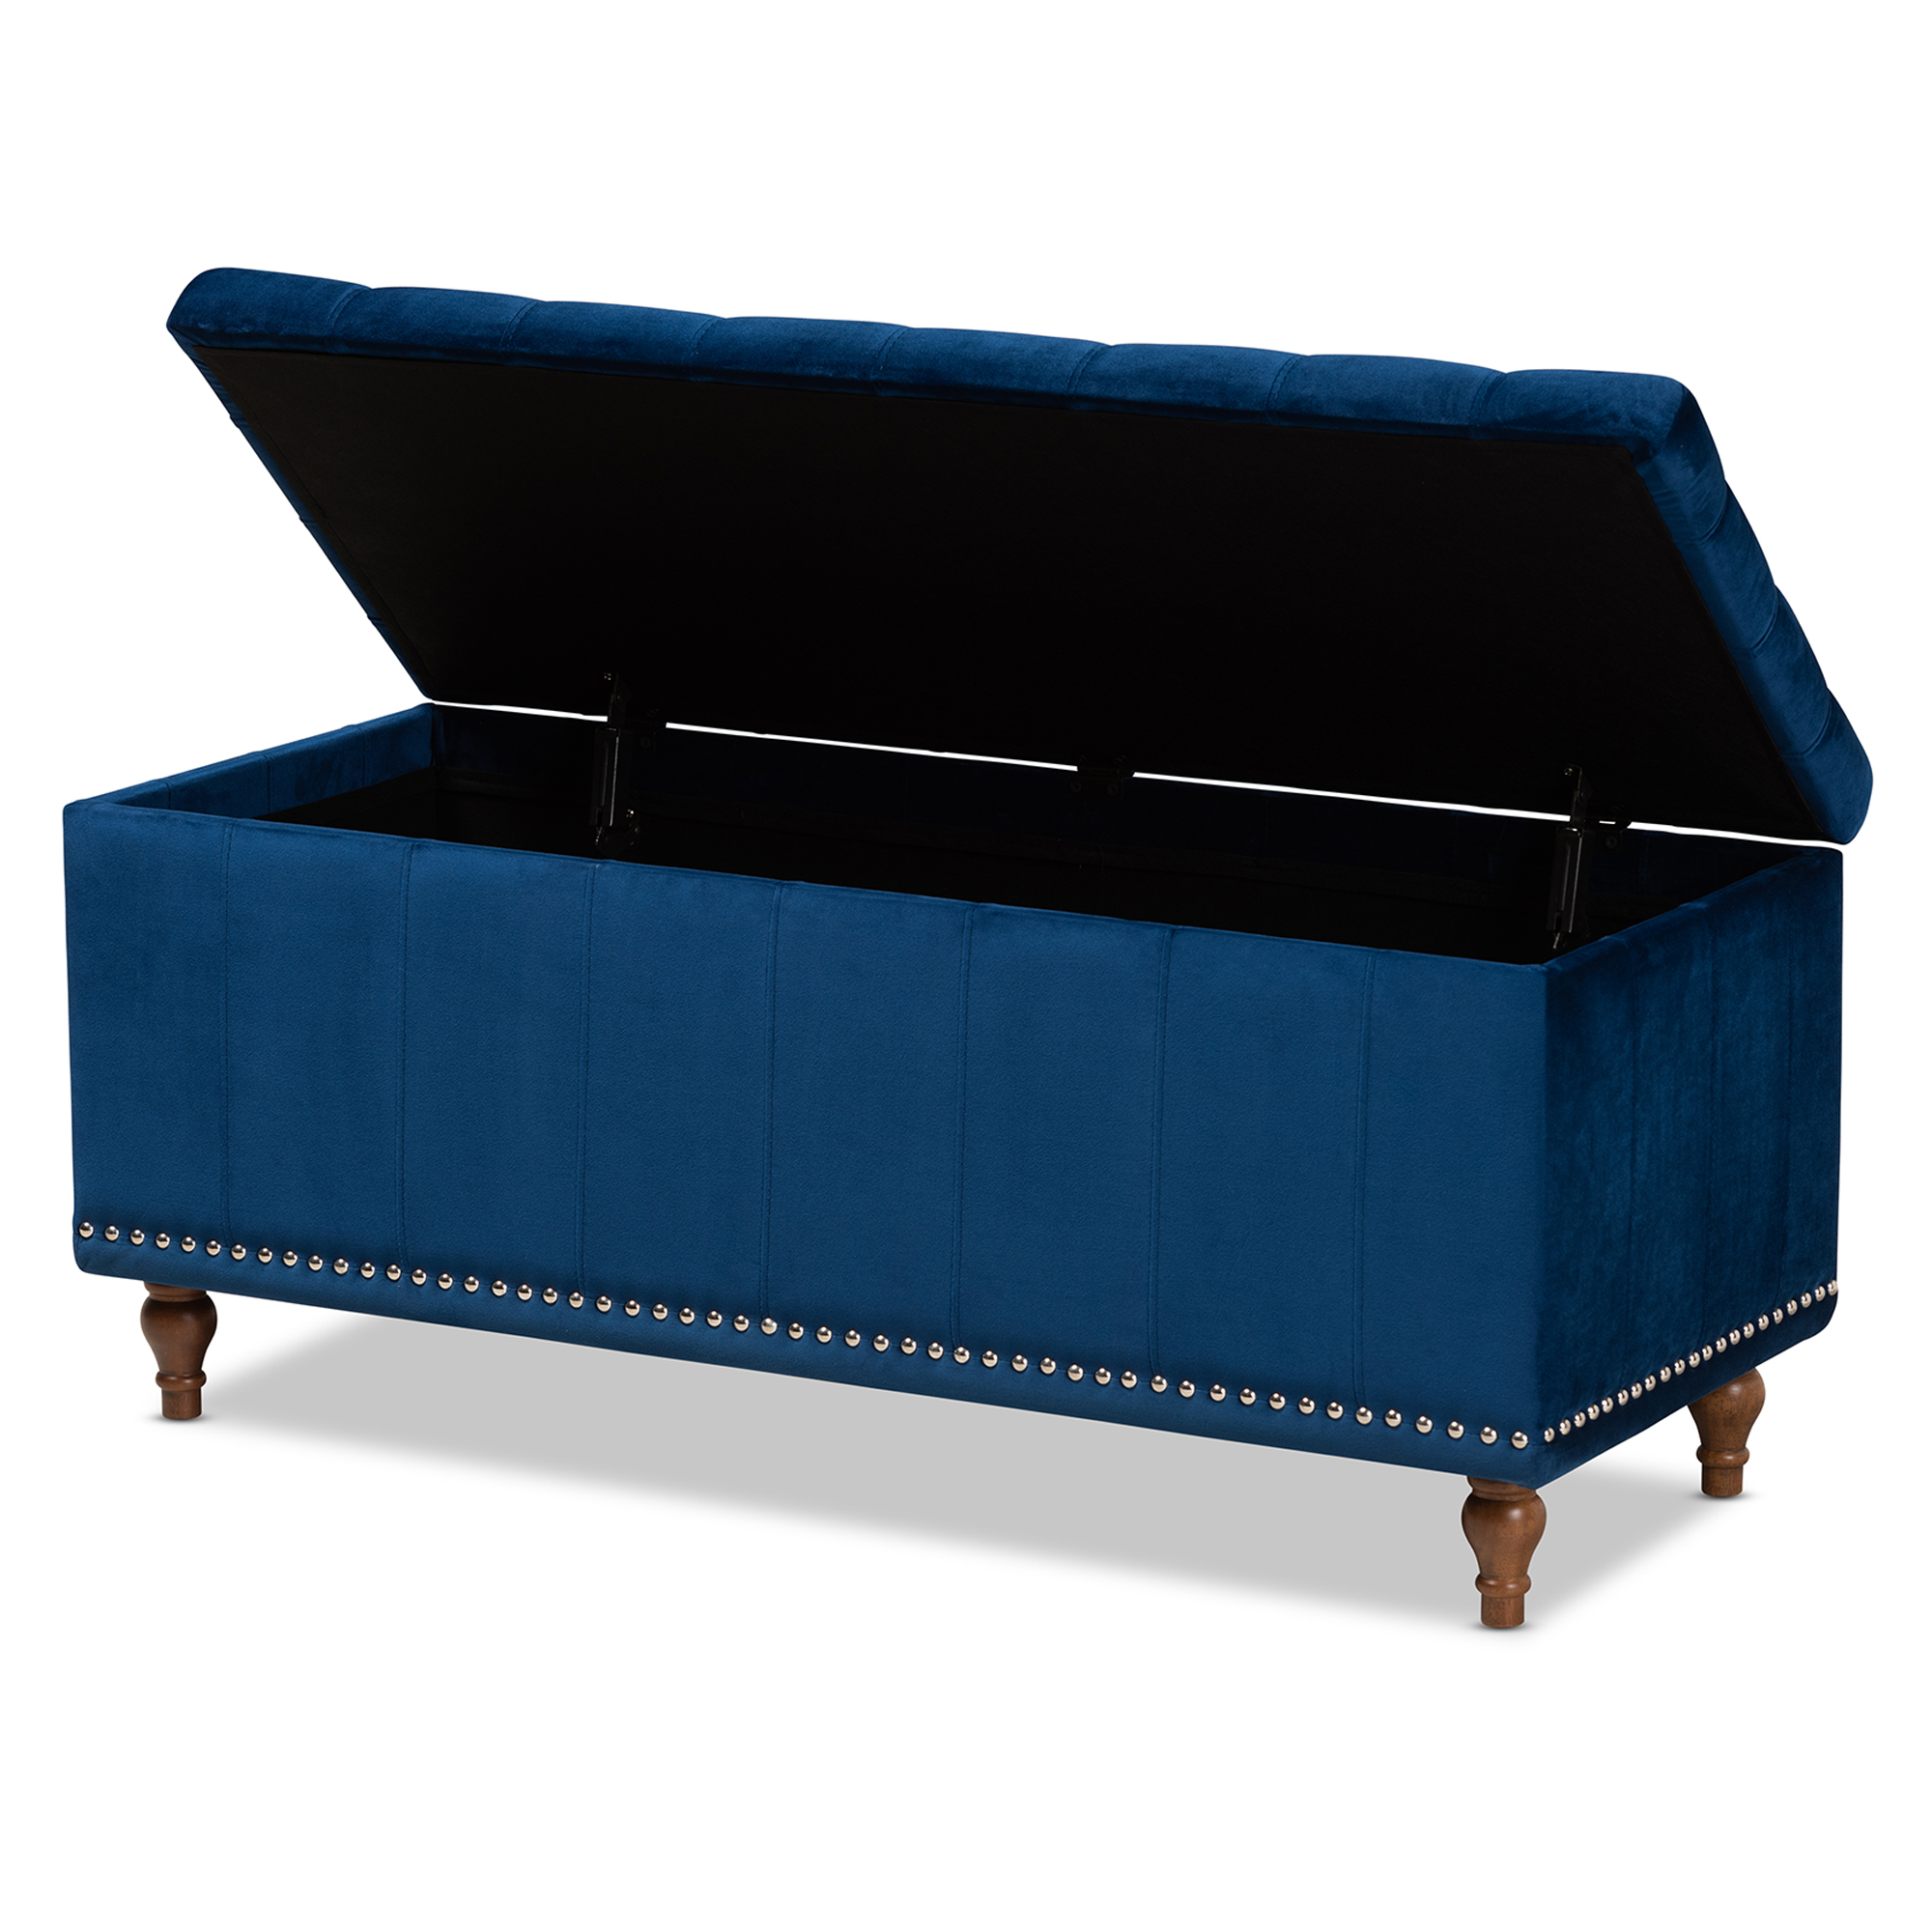 Baxton Studio Kaylee Modern and Contemporary Navy Blue Velvet Fabric Upholstered Button-Tufted Storage Ottoman Bench - image 3 of 11